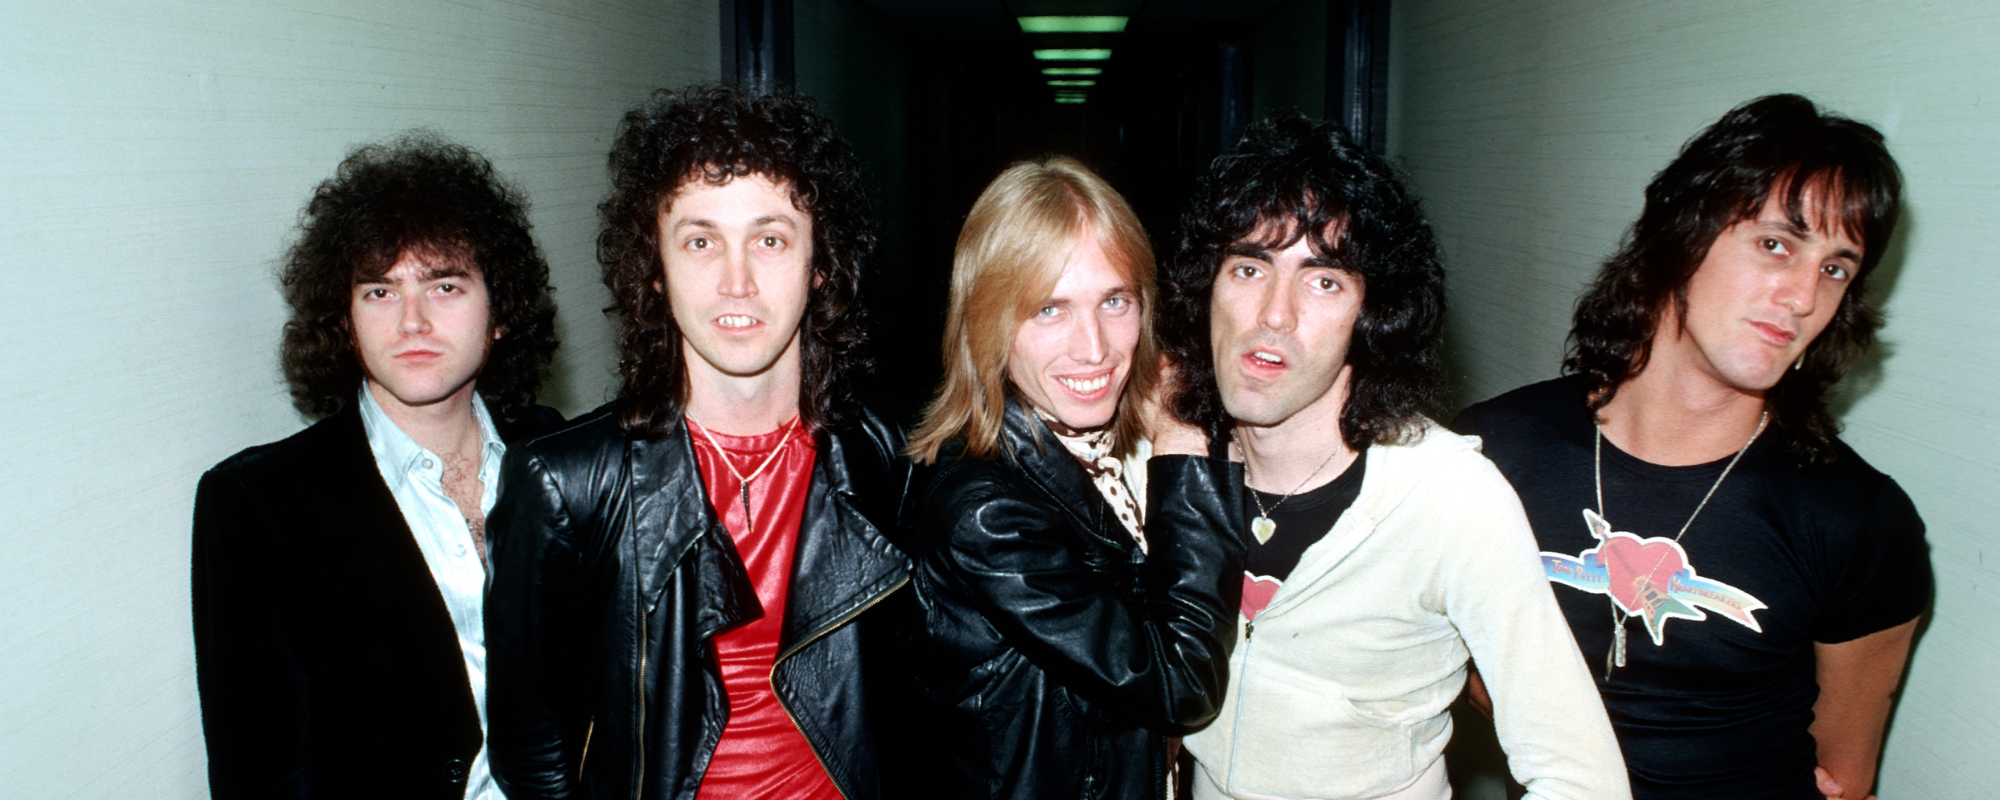 Top 5 Deep Cuts from Tom Petty and the Heartbreakers